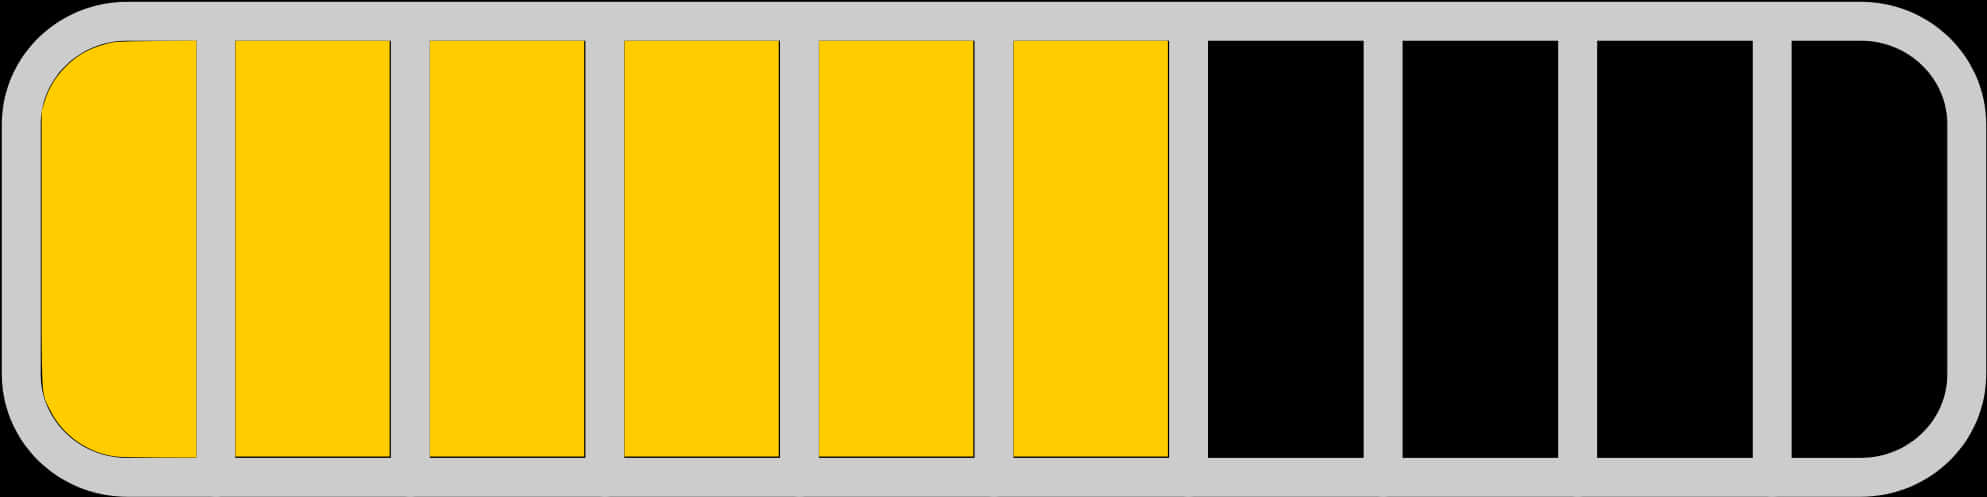 A Yellow And Black Rectangular Shapes